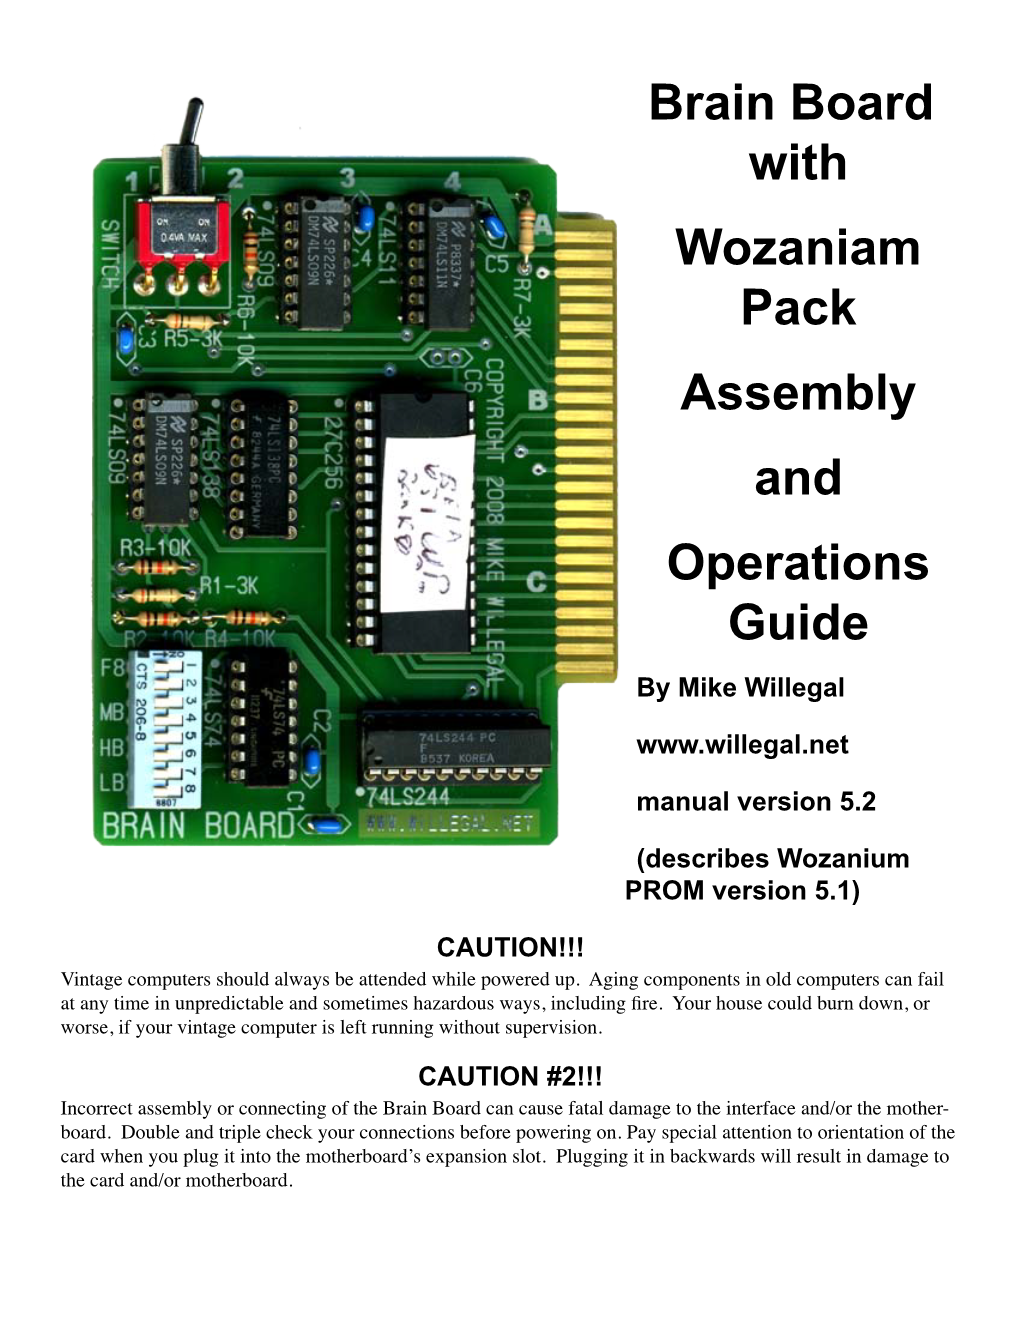 Brain Board with Wozaniam Pack Assembly and Operations Guide by Mike Willegal